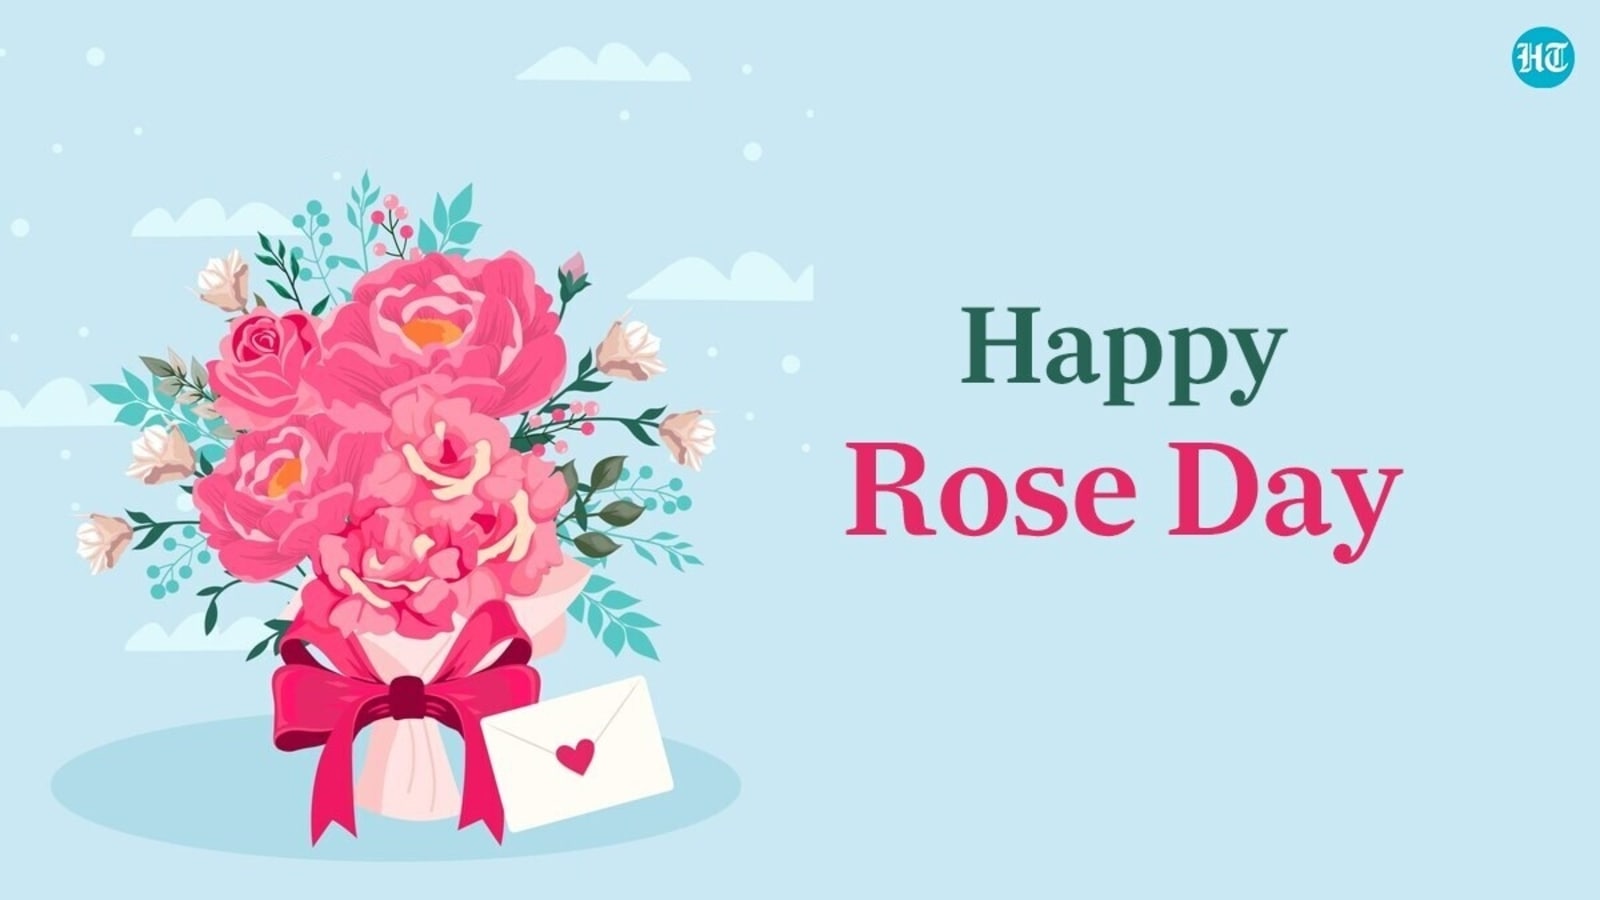 HD Wallpaper of Rose Day 2017 Latest Images of Rose for Gf lovers Rose day  7th Feb  wwwlovelyheartin